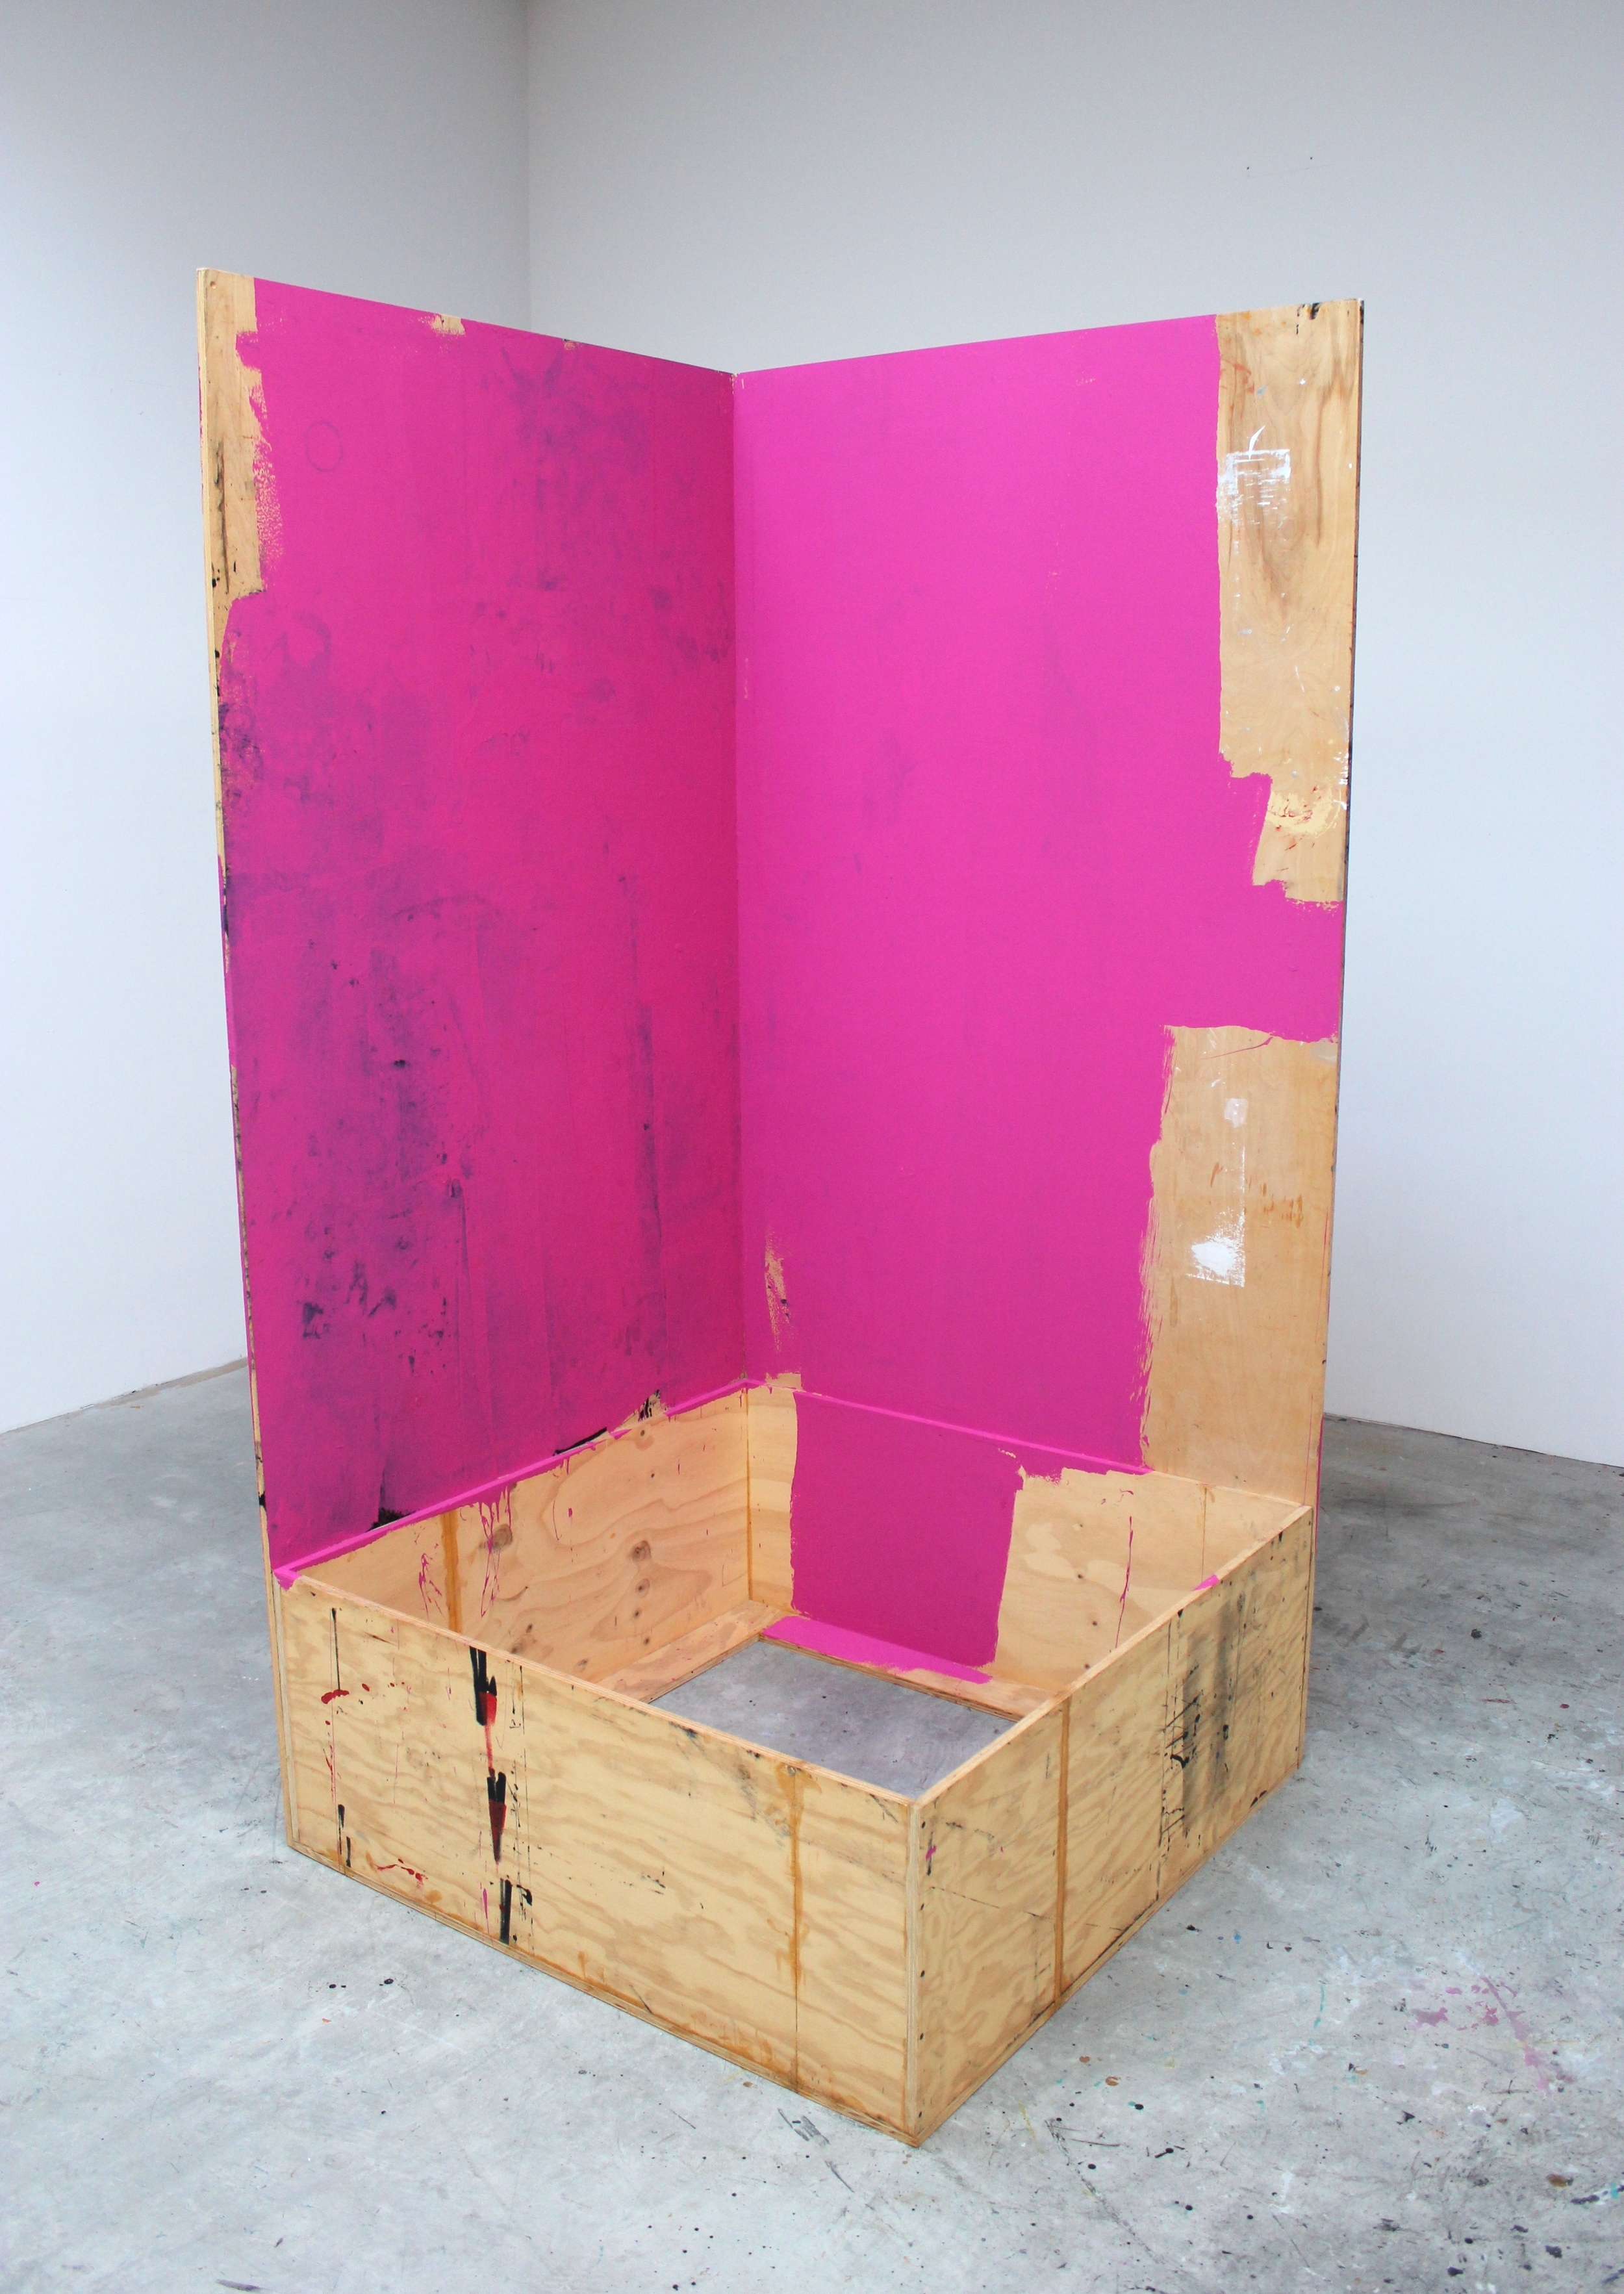  Open Container 2013 96 x 48.5 x 48 inches 